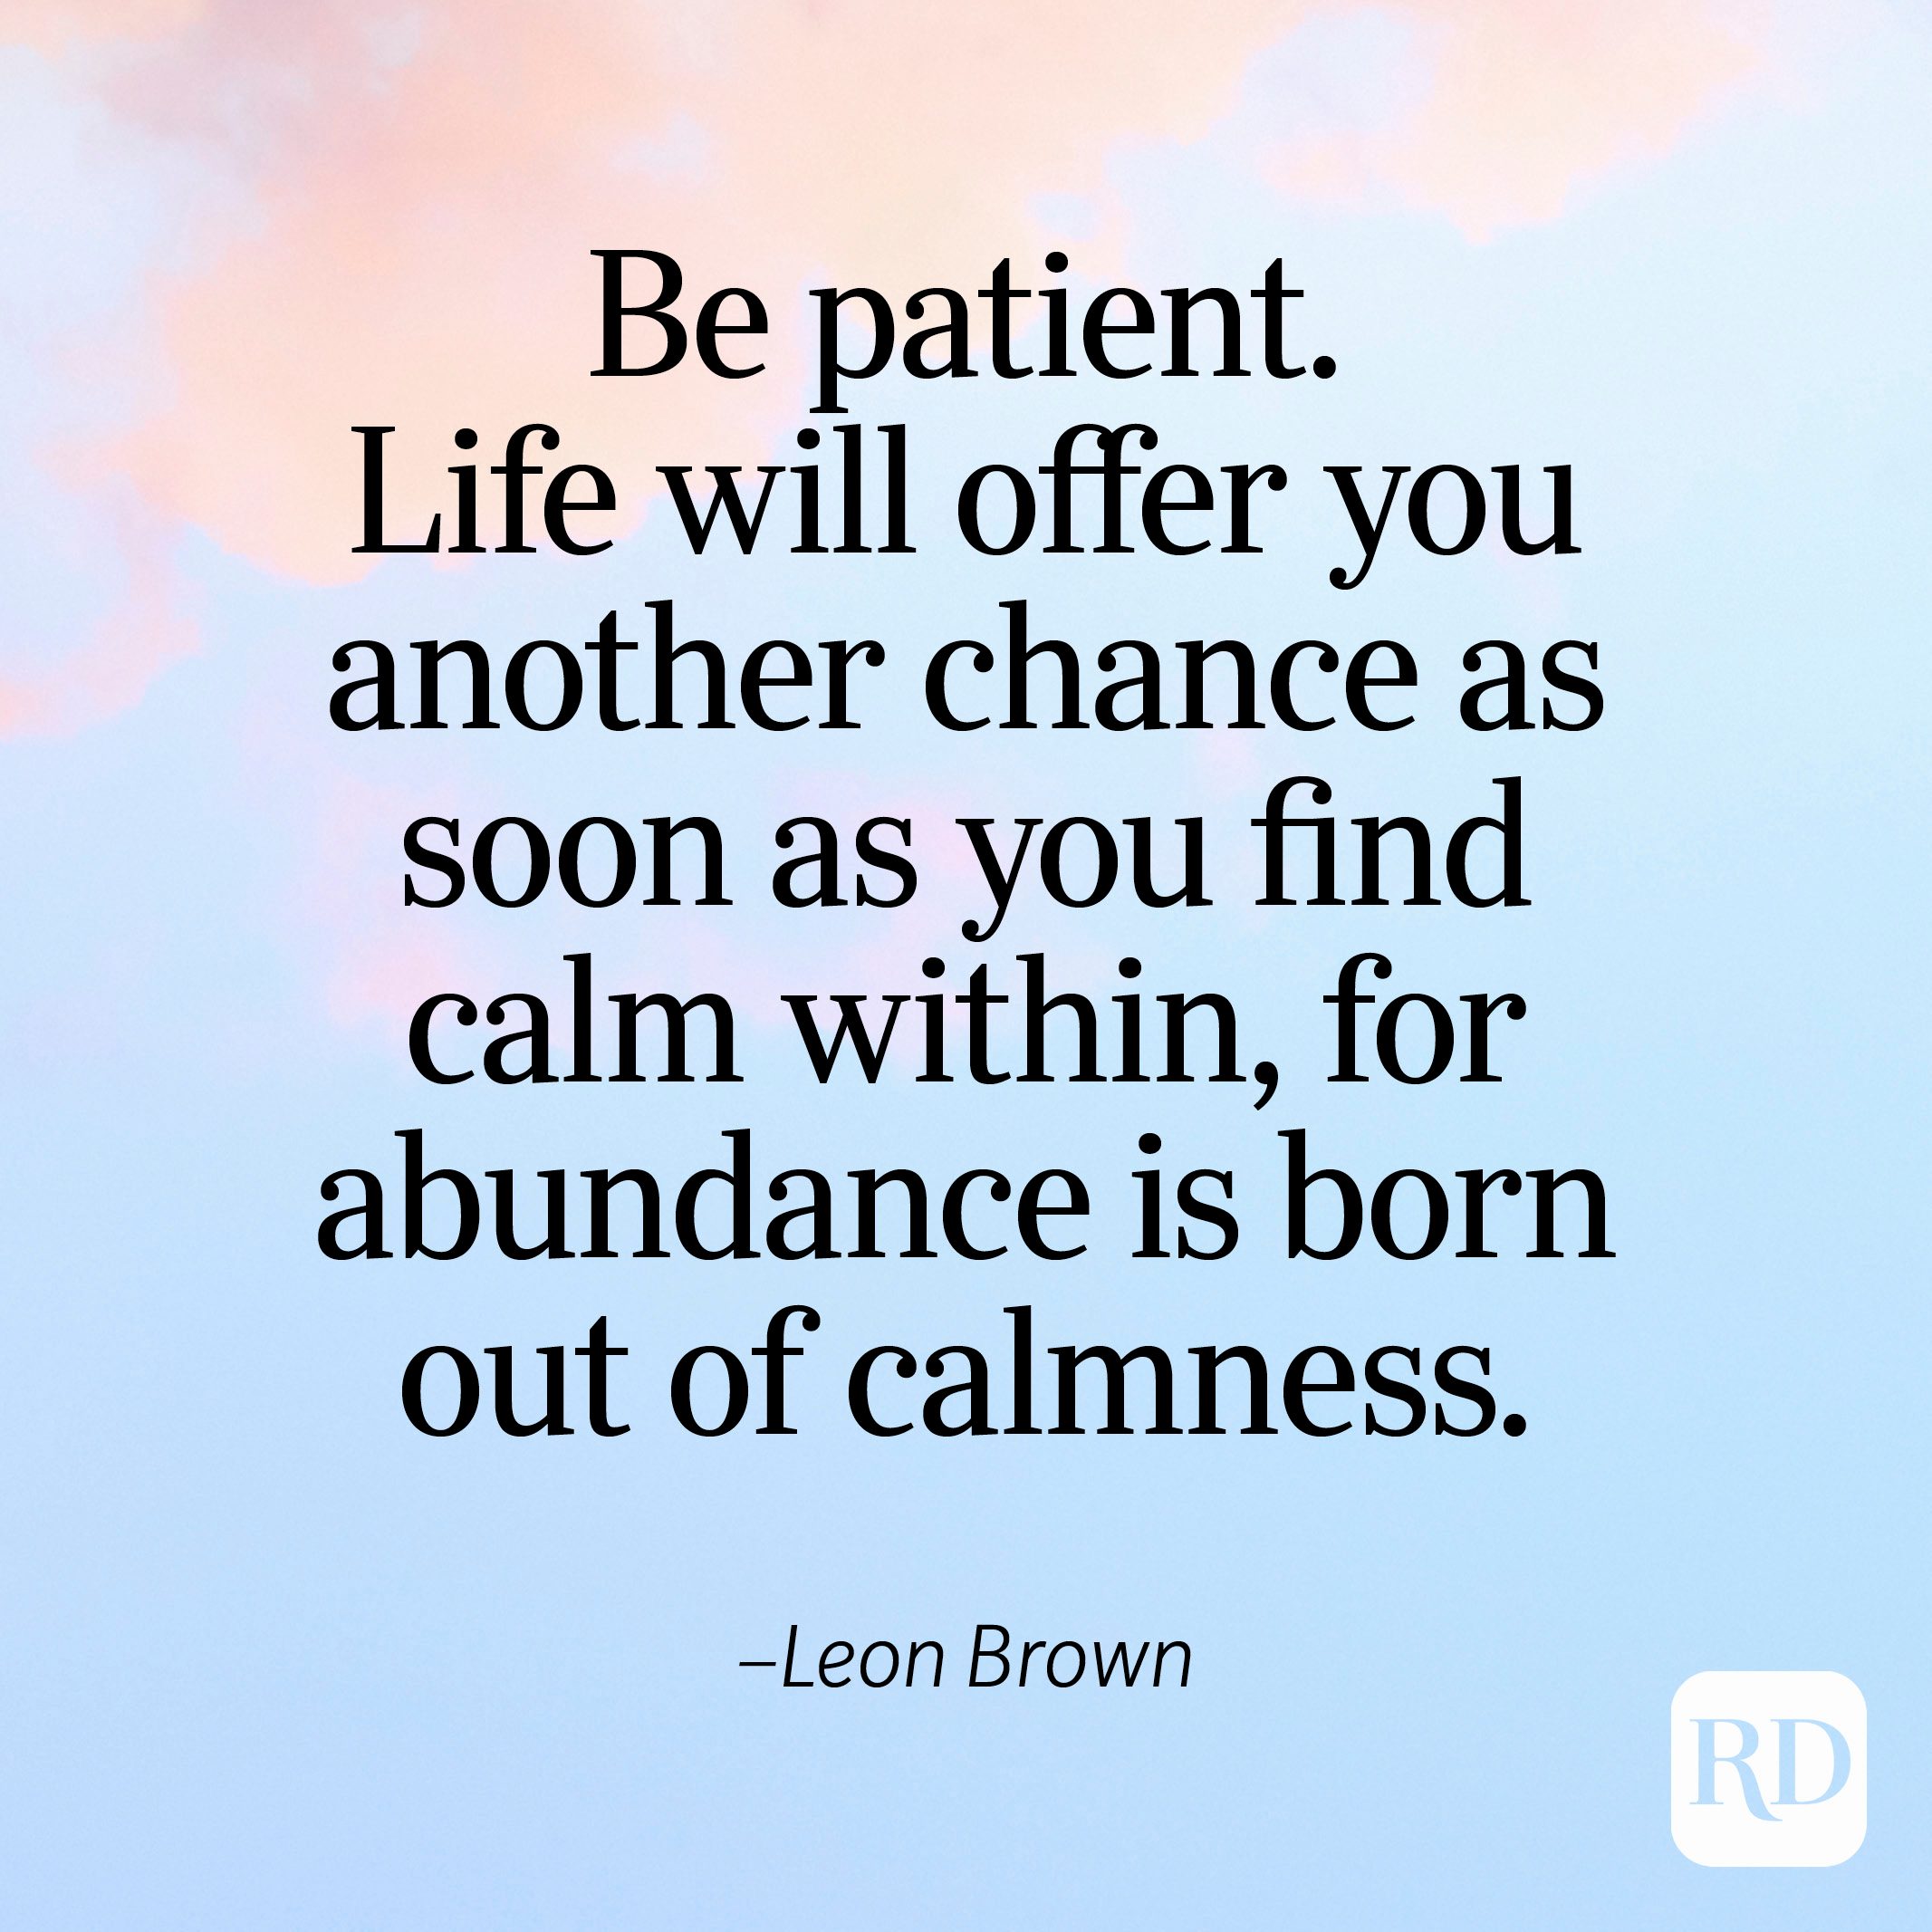 "Be patient. Life will offer you another chance as soon as you find calm within, for abundance is born out of calmness." —Leon Brown